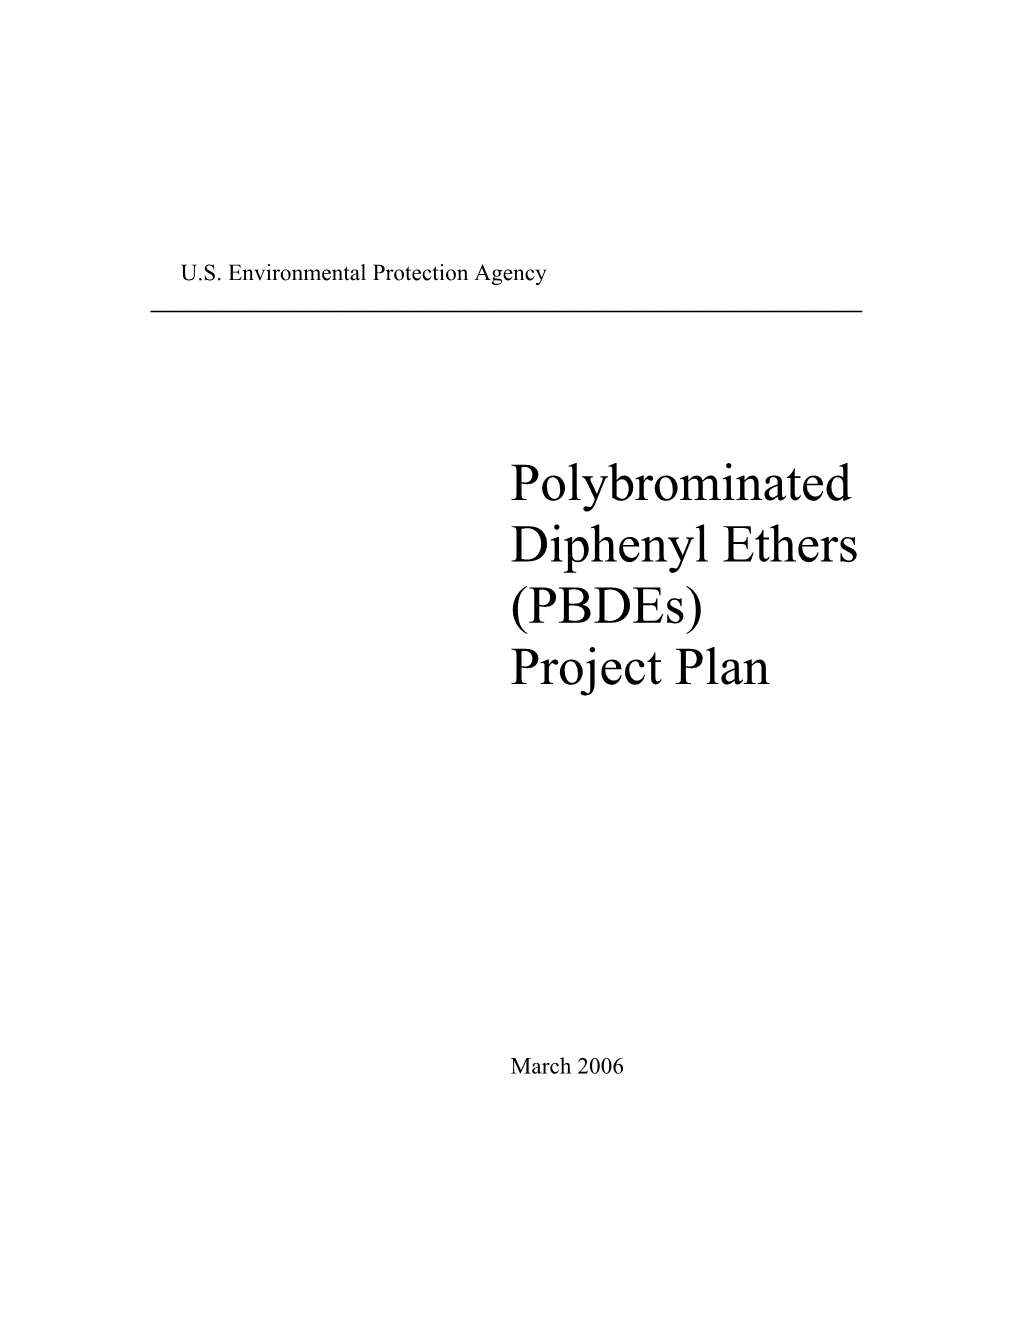 Polybrominated Diphenyl Ethers (Pbdes) Project Plan